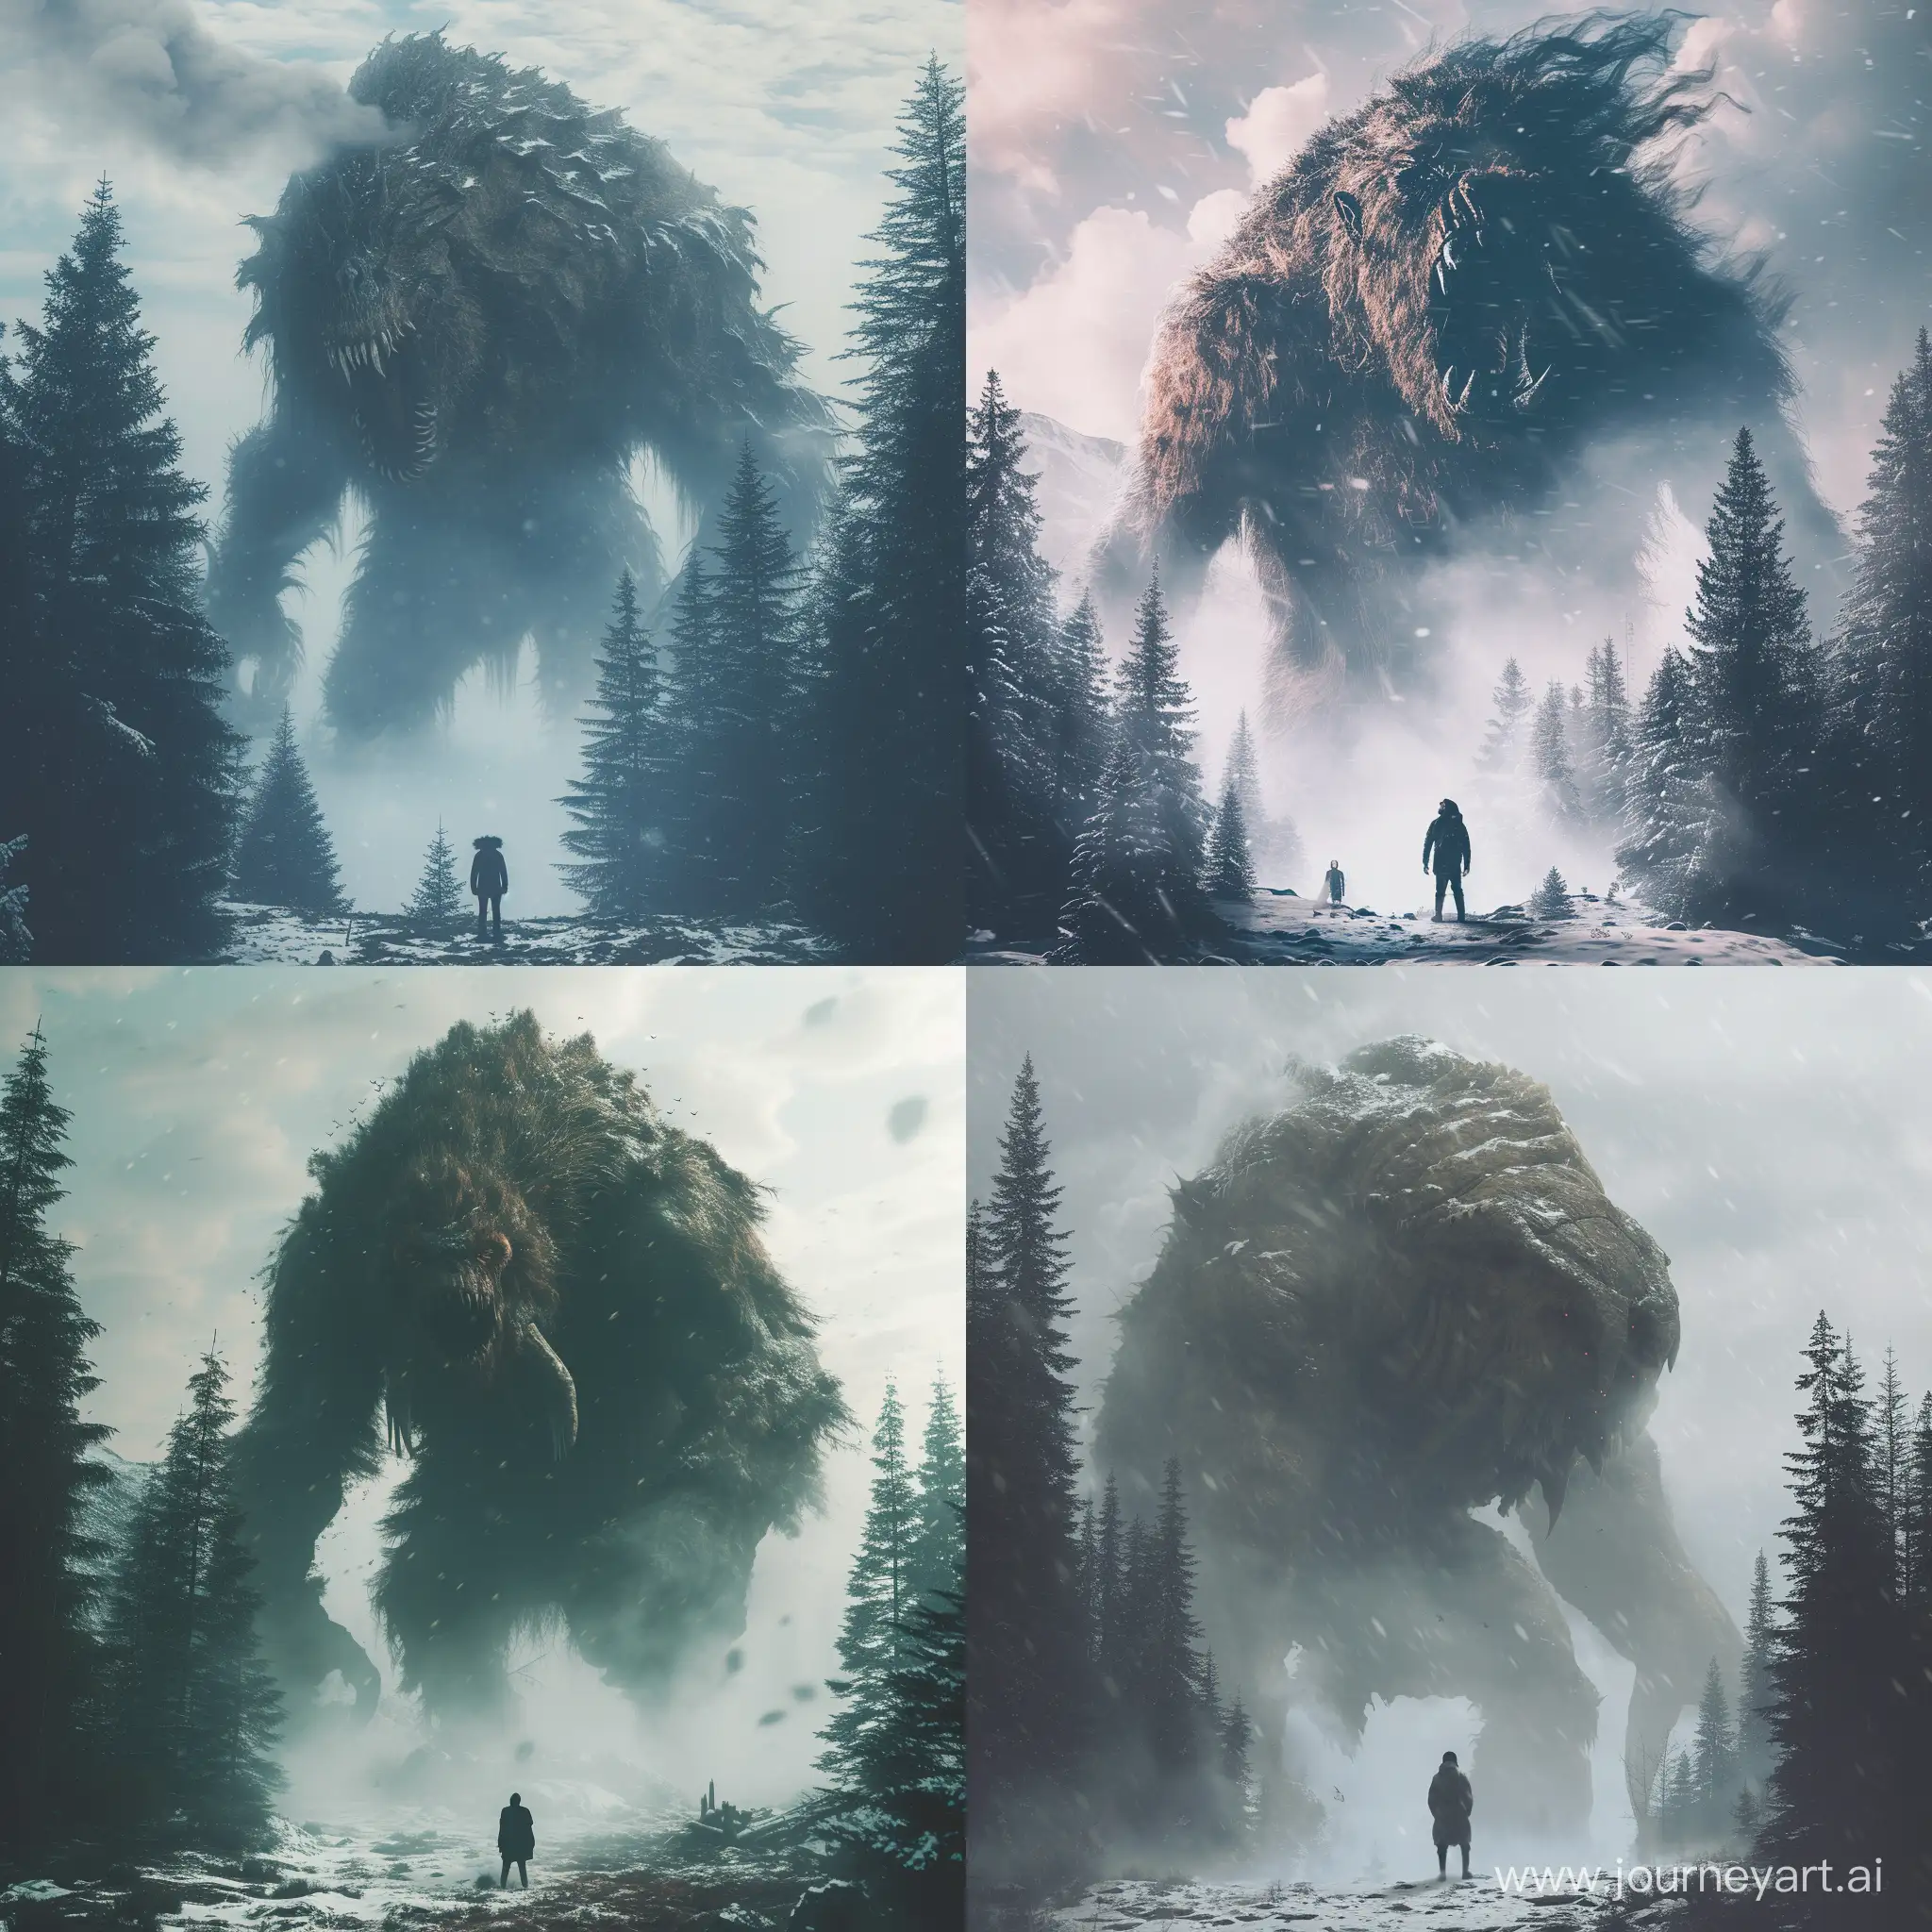 Majestic-Encounter-Giant-Mythical-Creature-and-Brave-Human-in-Enchanted-Winter-Forest